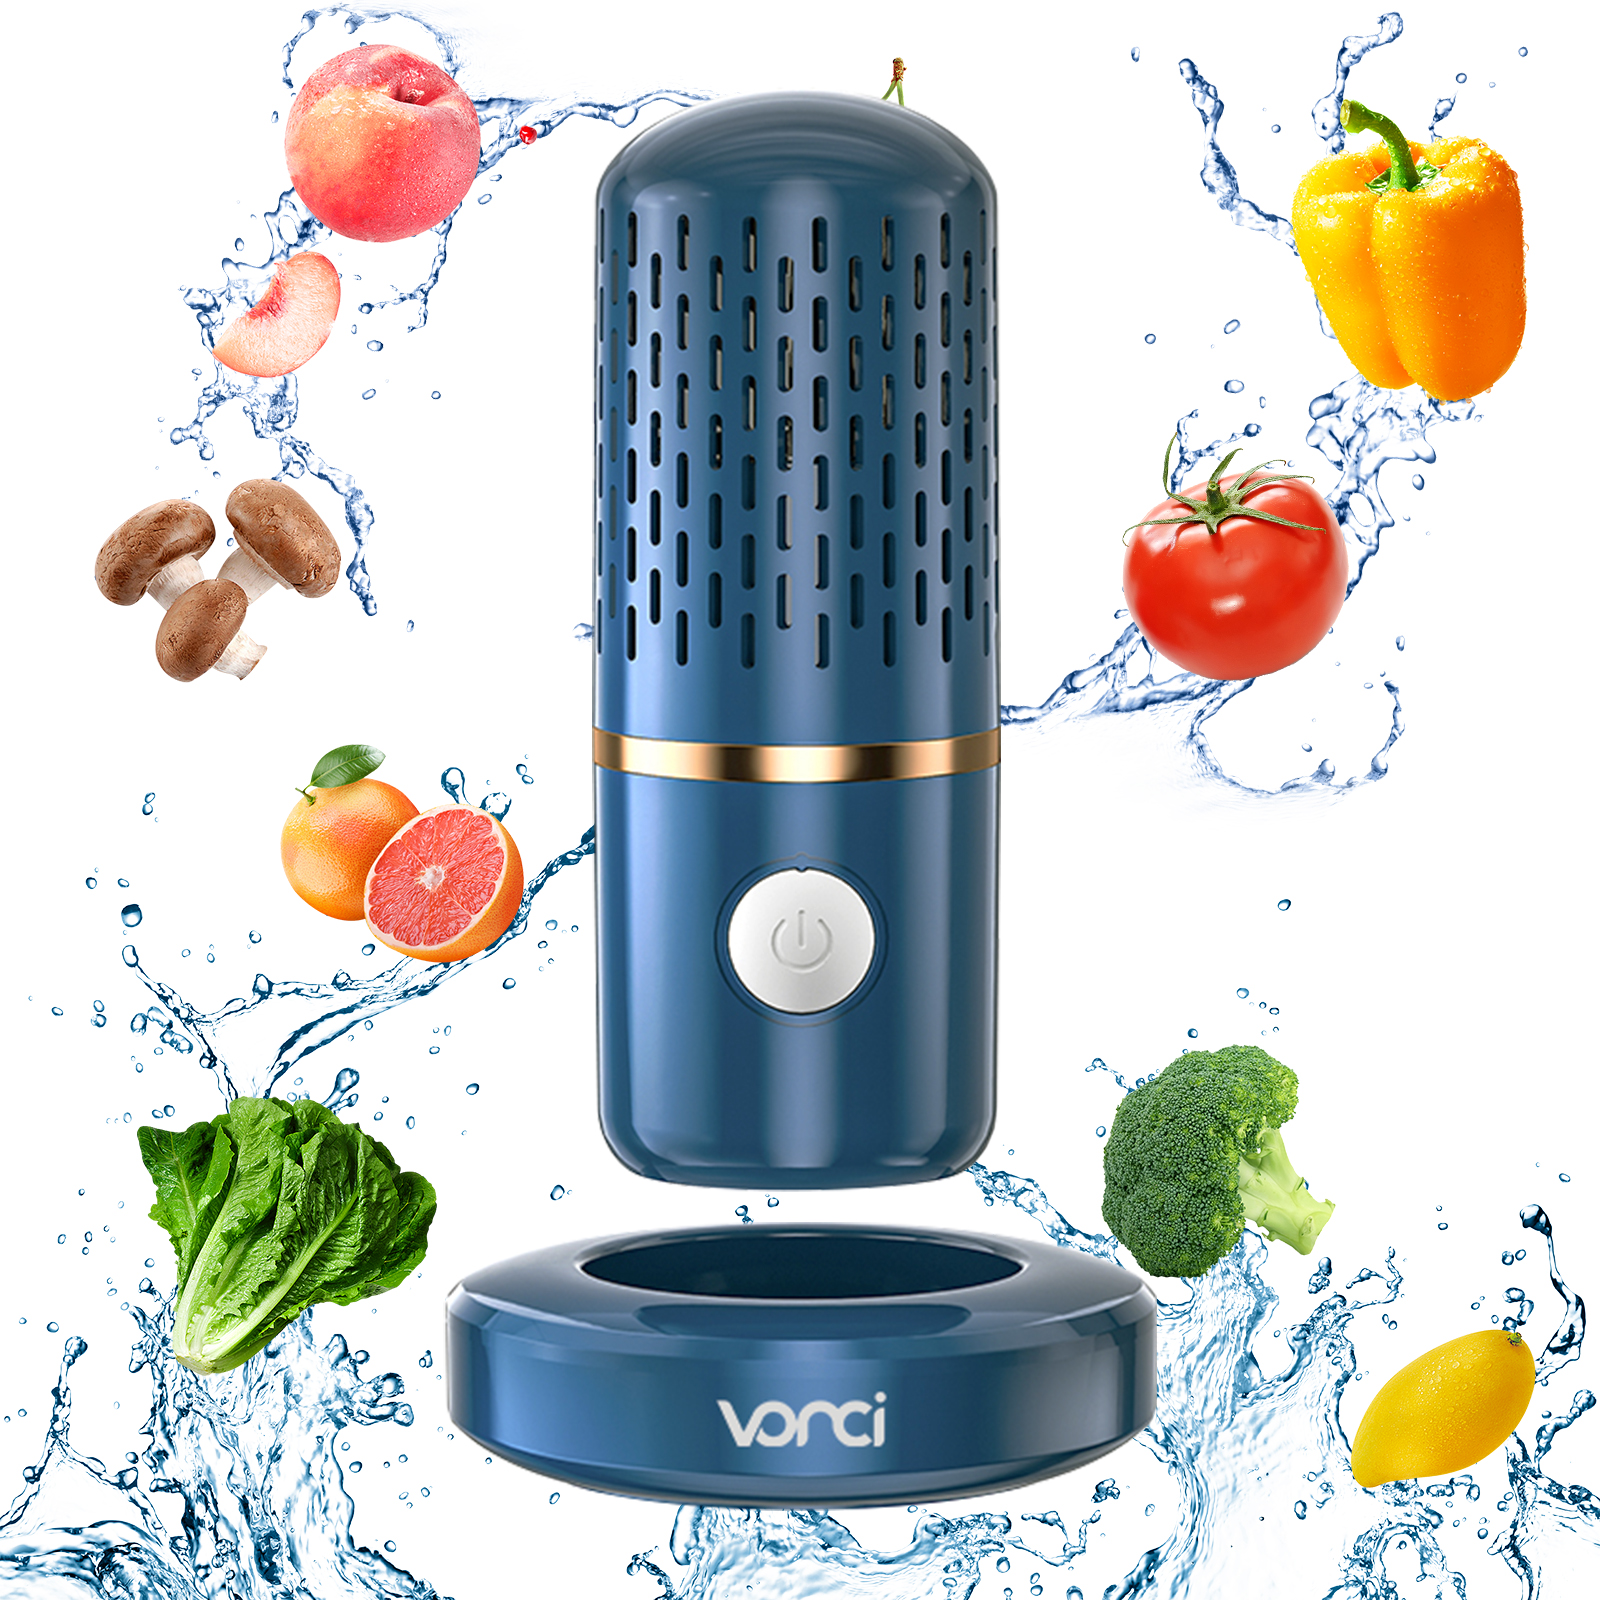 Fruit and Vegetable Cleaning Machine,Fruit Cleaner Device in Water,Portable  USB Wireless Food Purifier Vegetable Washer,Ultrasonic Fruit Washer with